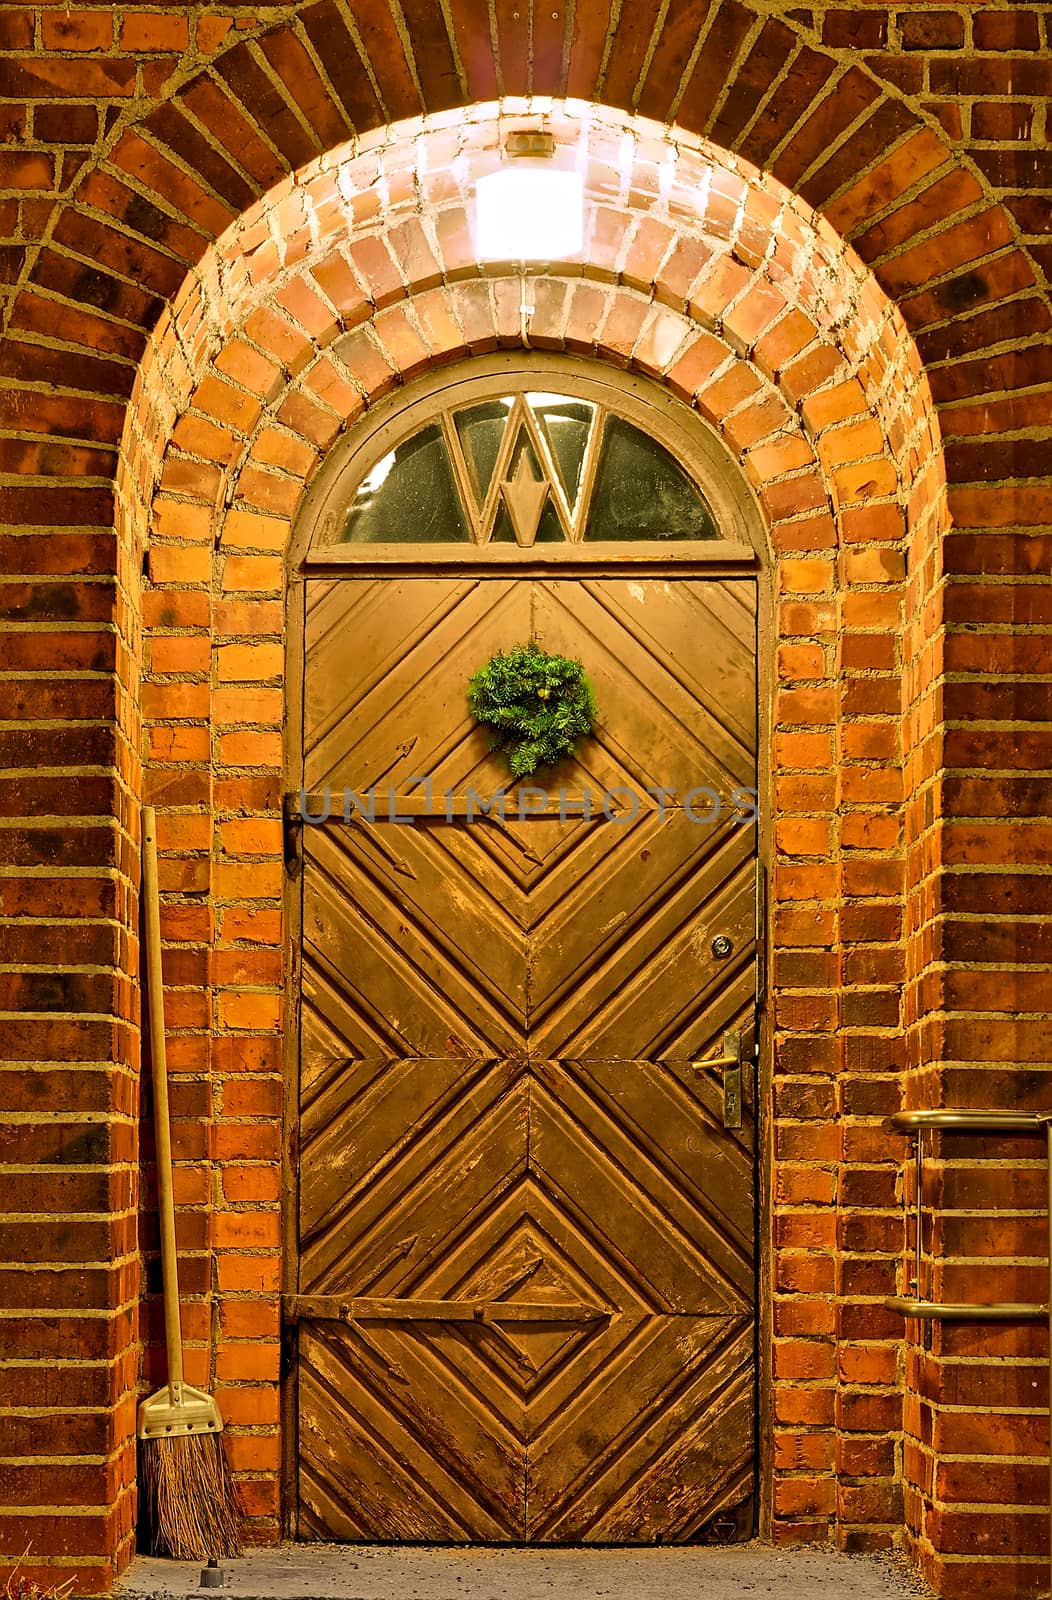 Lighted entrance with old decorated wooden door. Round top and small window above the door. Surrounded with stone walls.